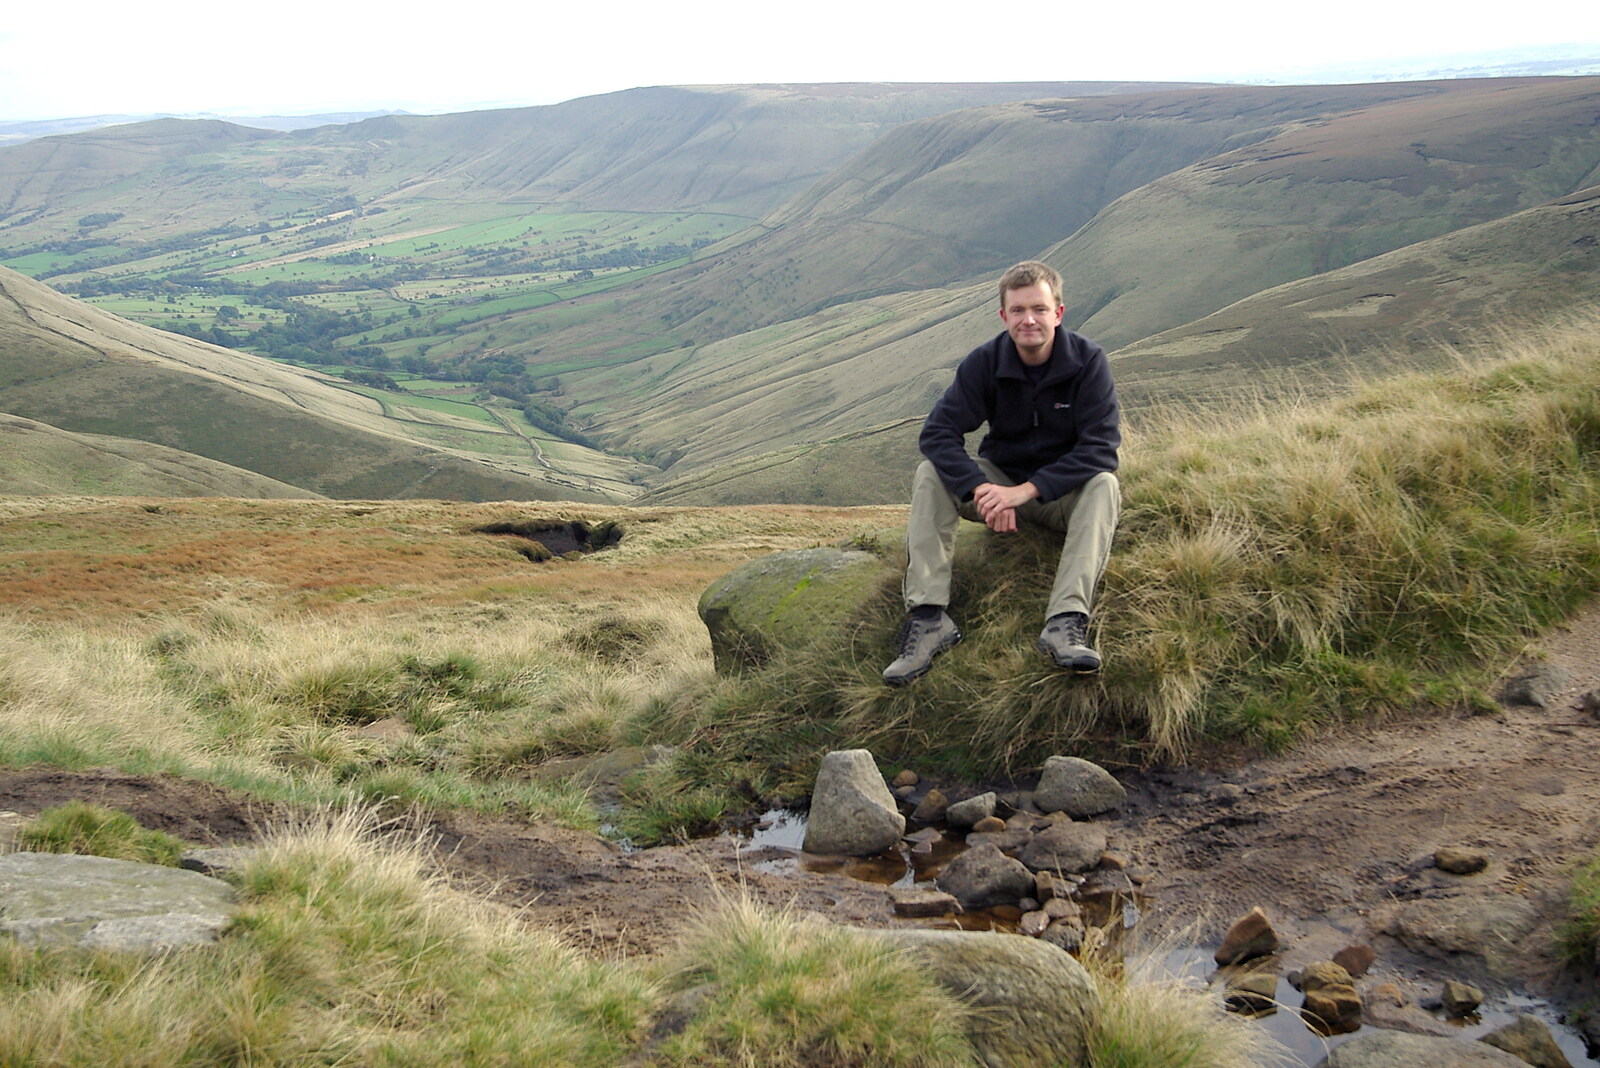 The Pennine Way: Lost on Kinder Scout, Derbyshire - 9th October 2005: Self-timer photo